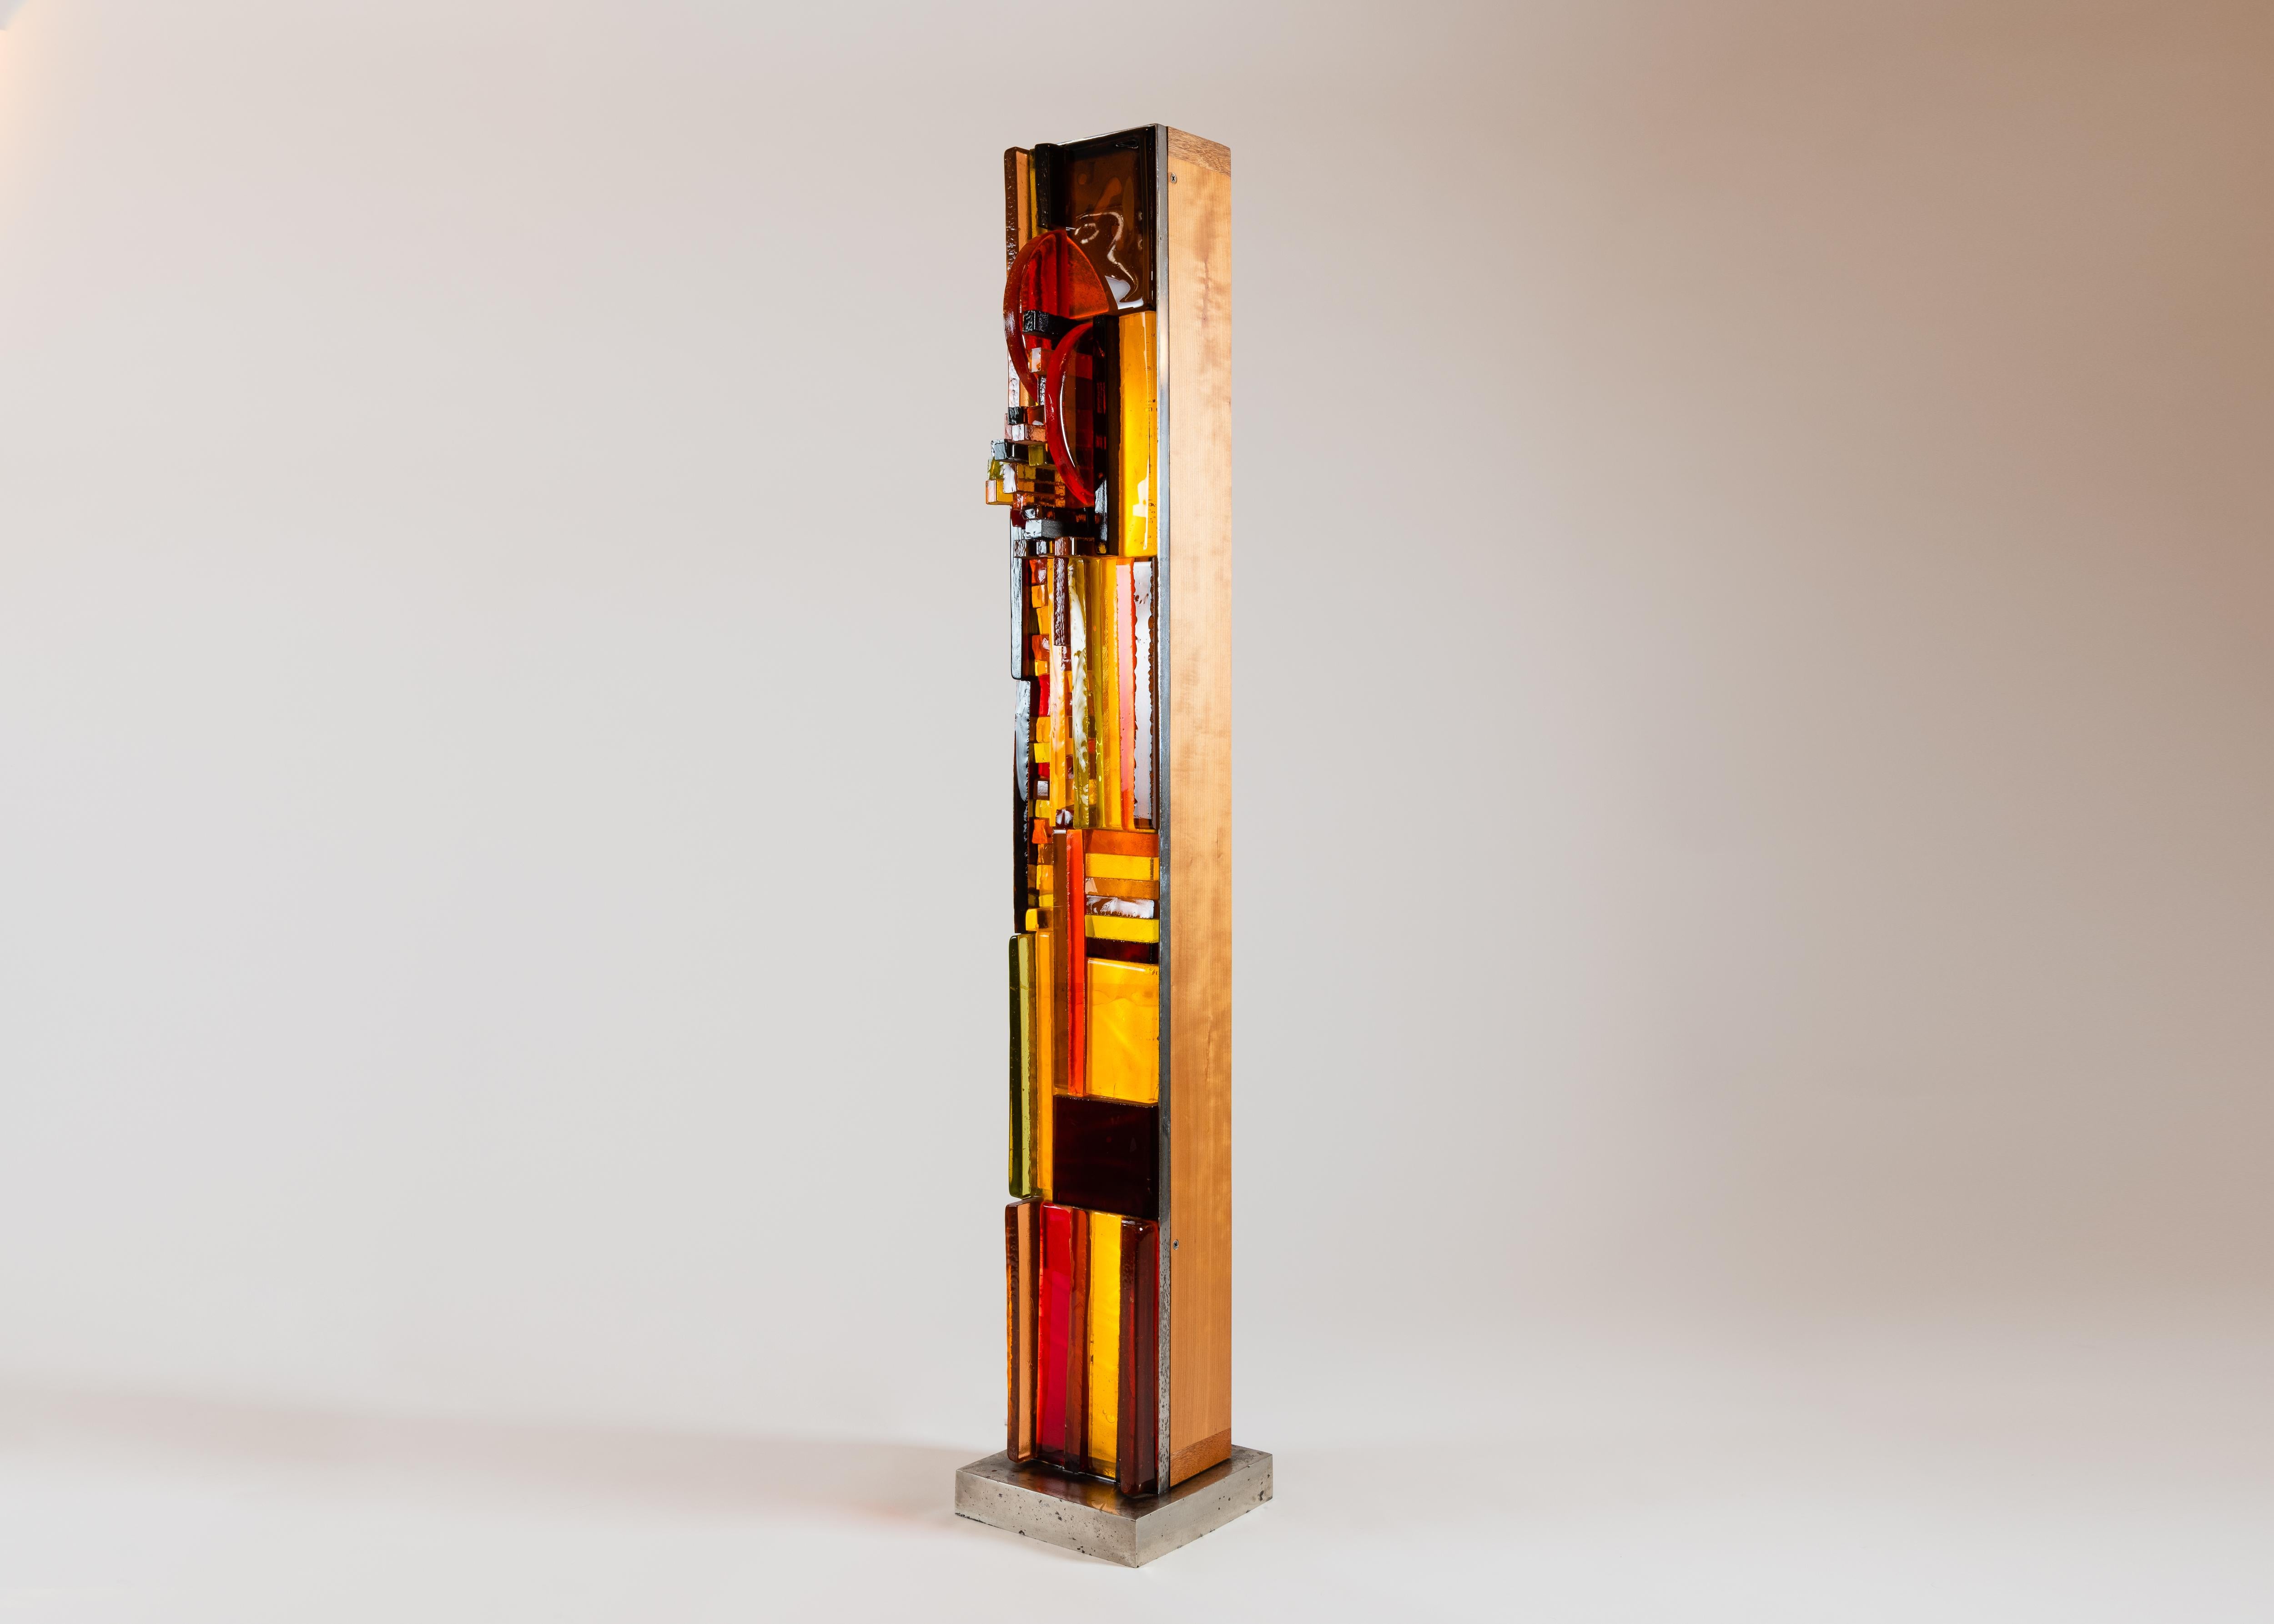 With this illuminated sculpture Labret renders stained glass -- an elemental part of his artistic heritage -- vividly three dimensional, endowing it's planar composition solidity with a magma like texture and crisscrossing forms that spring forth